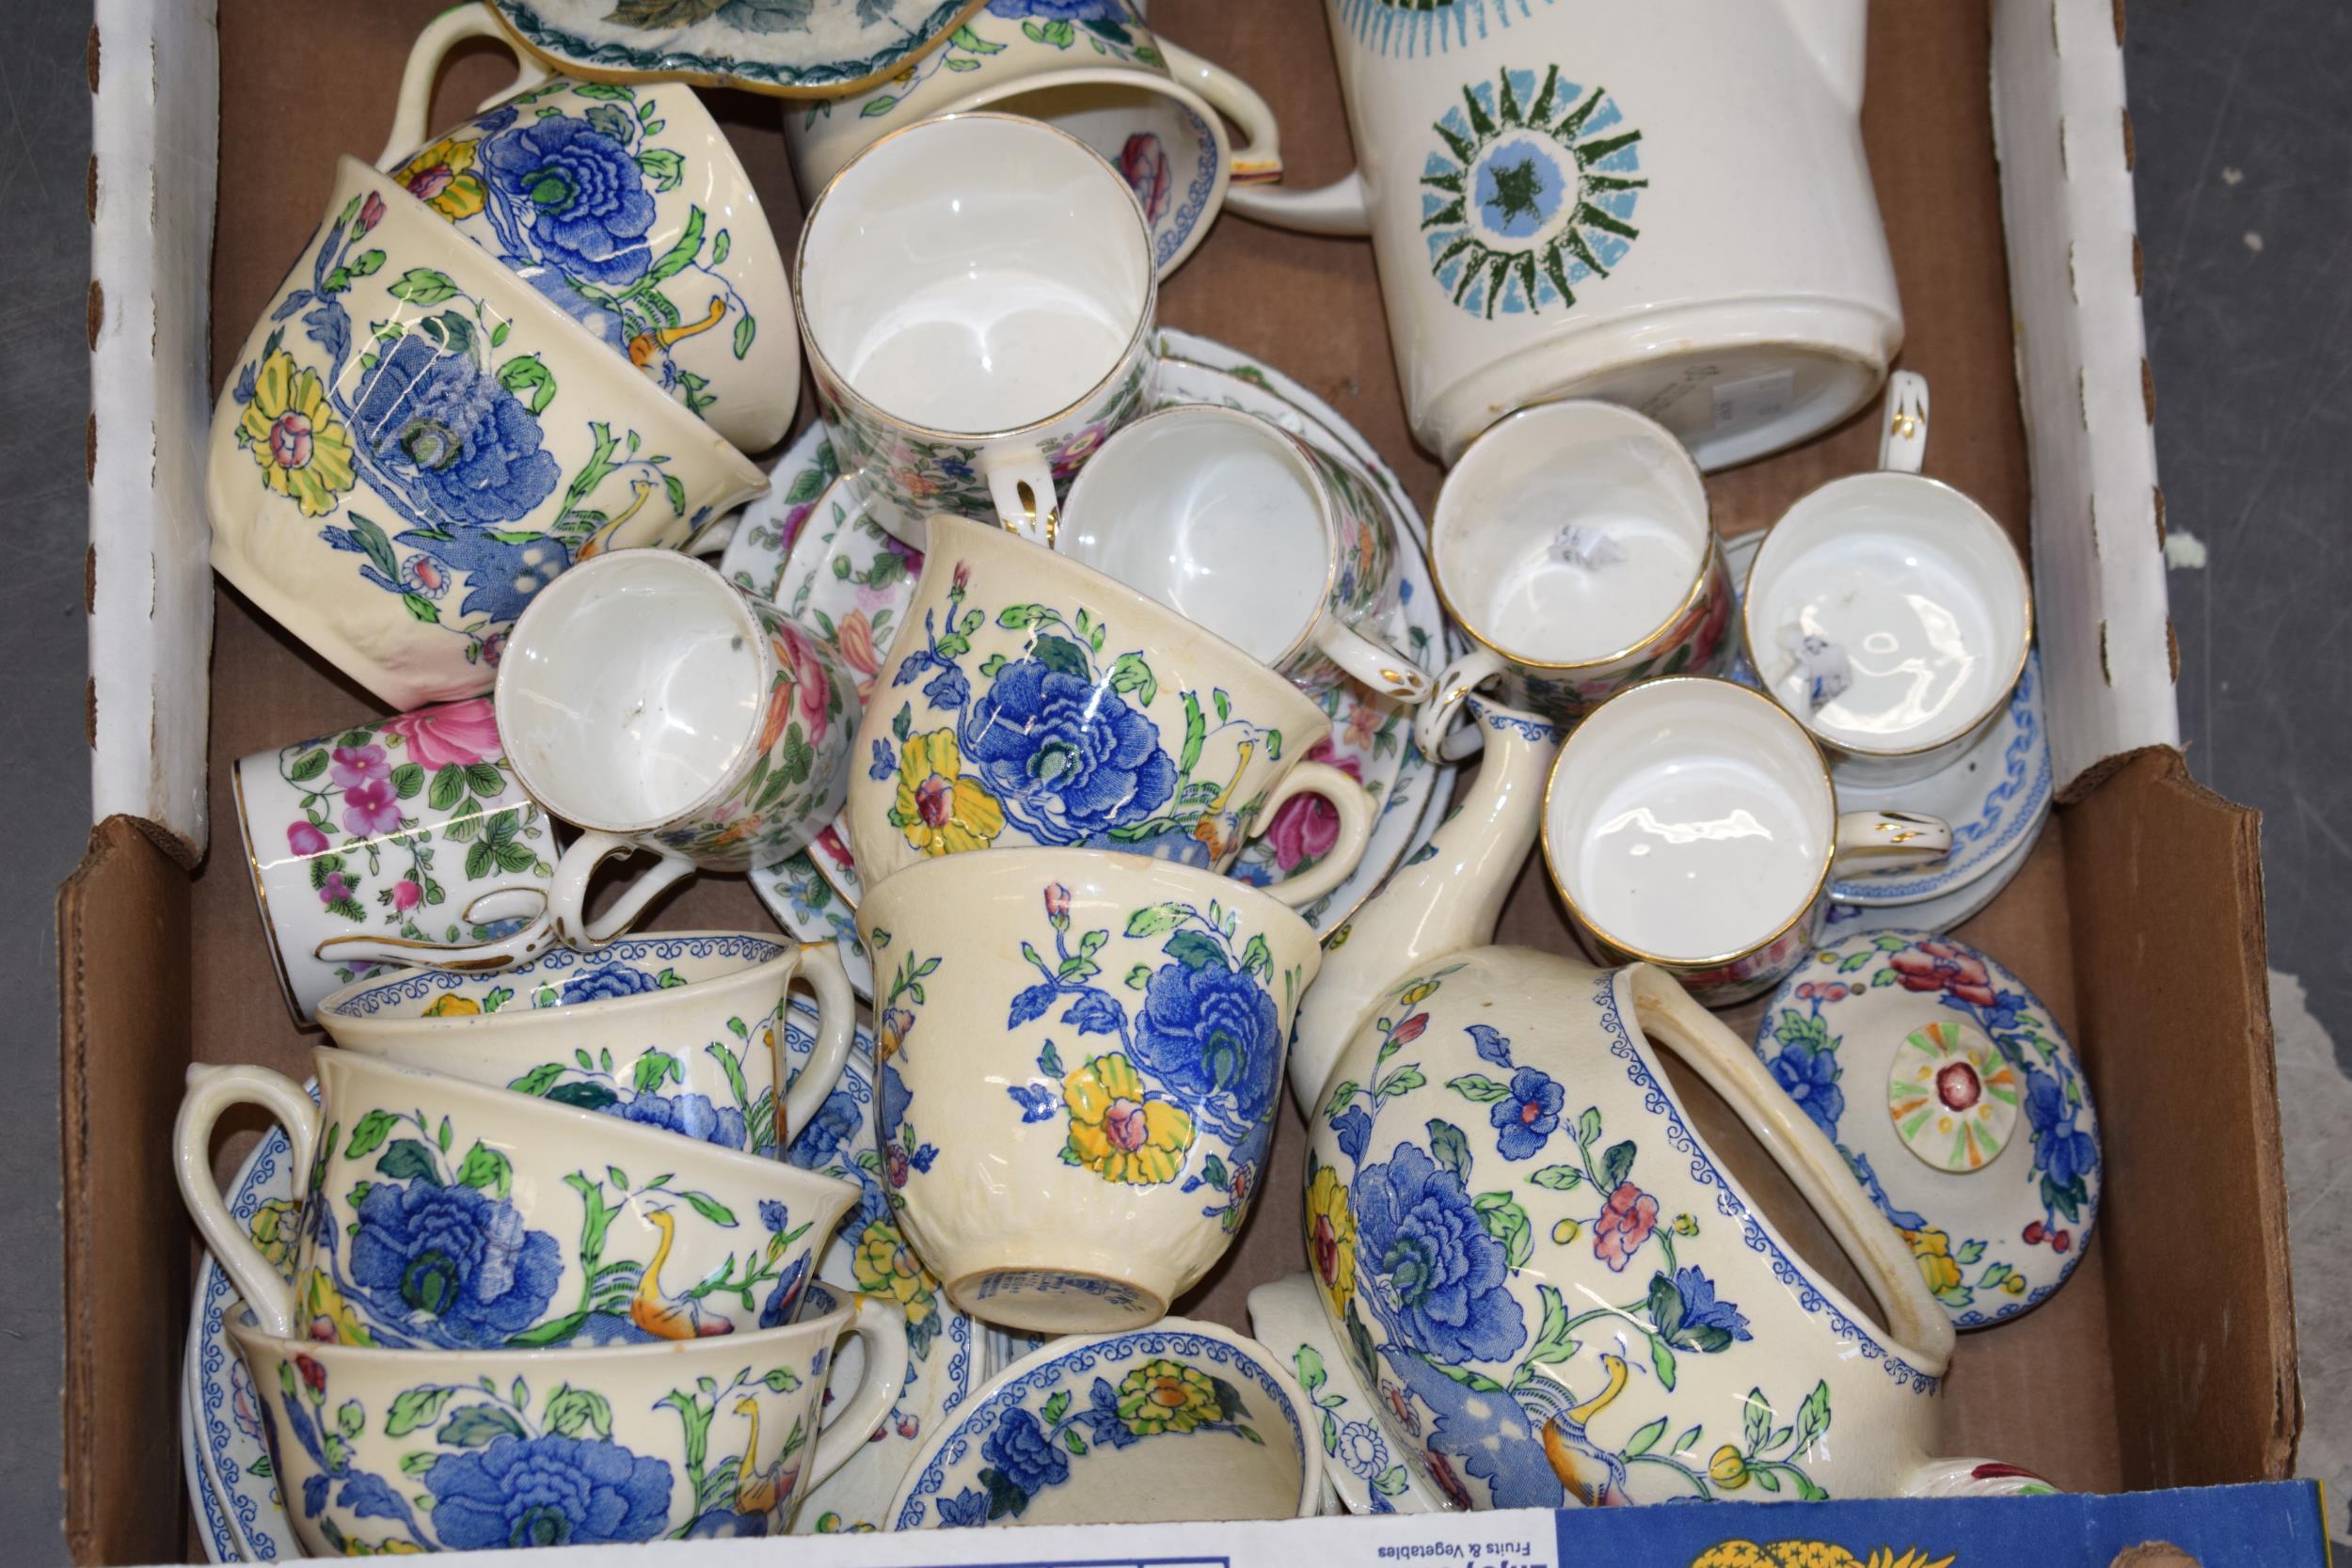 A mixed group of ceramics to include: Masons Regency, Crown Staffordshire, Davenport, and more. - Image 3 of 3